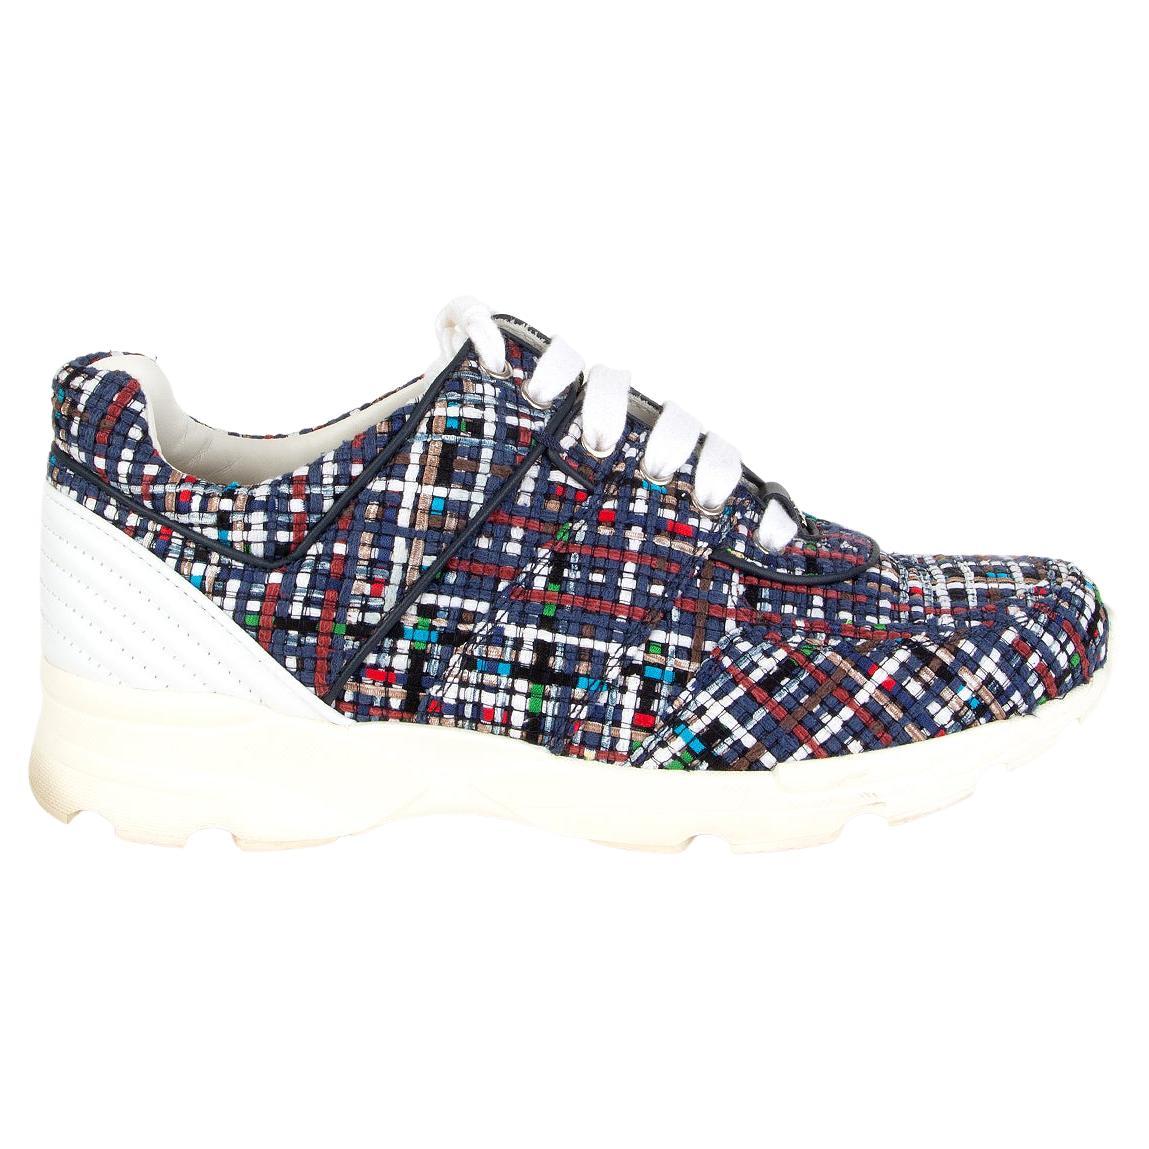 CHANEL blue white BOULCE TWEED Sneakers Shoes 38.5